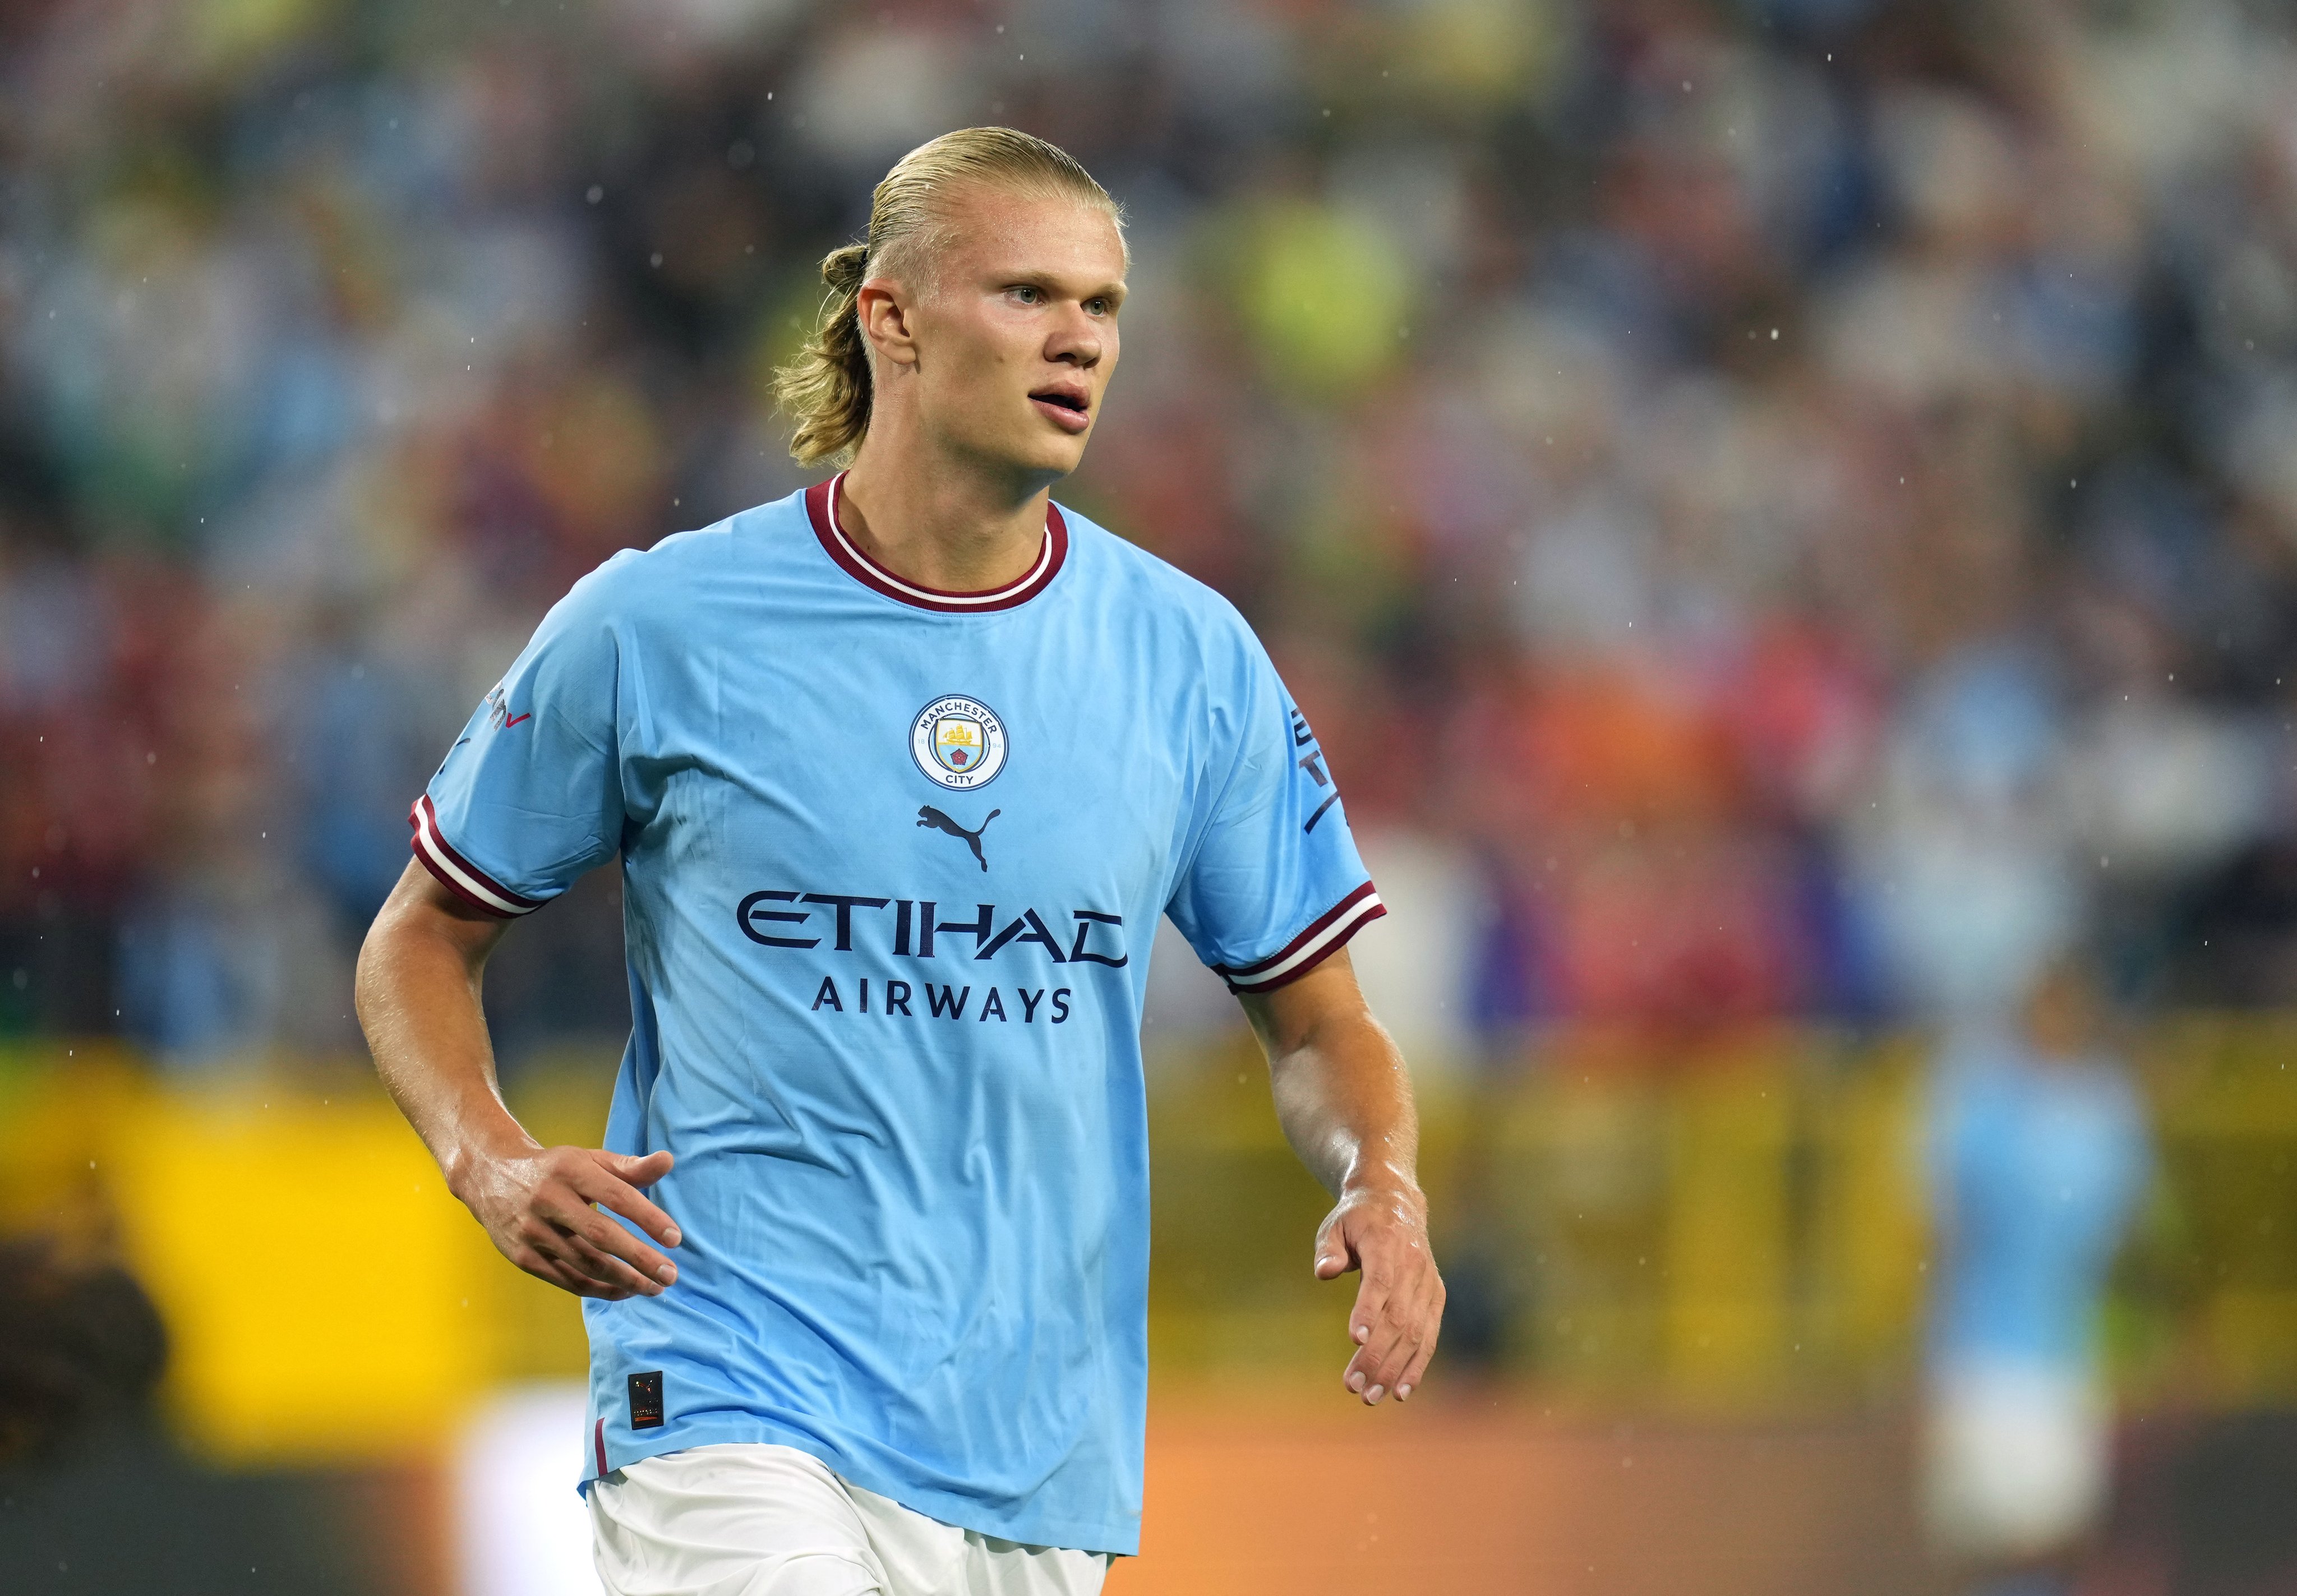 Don’t know when Erling Haaland will be back as he has ligament damage, confirms Pep Guardiola